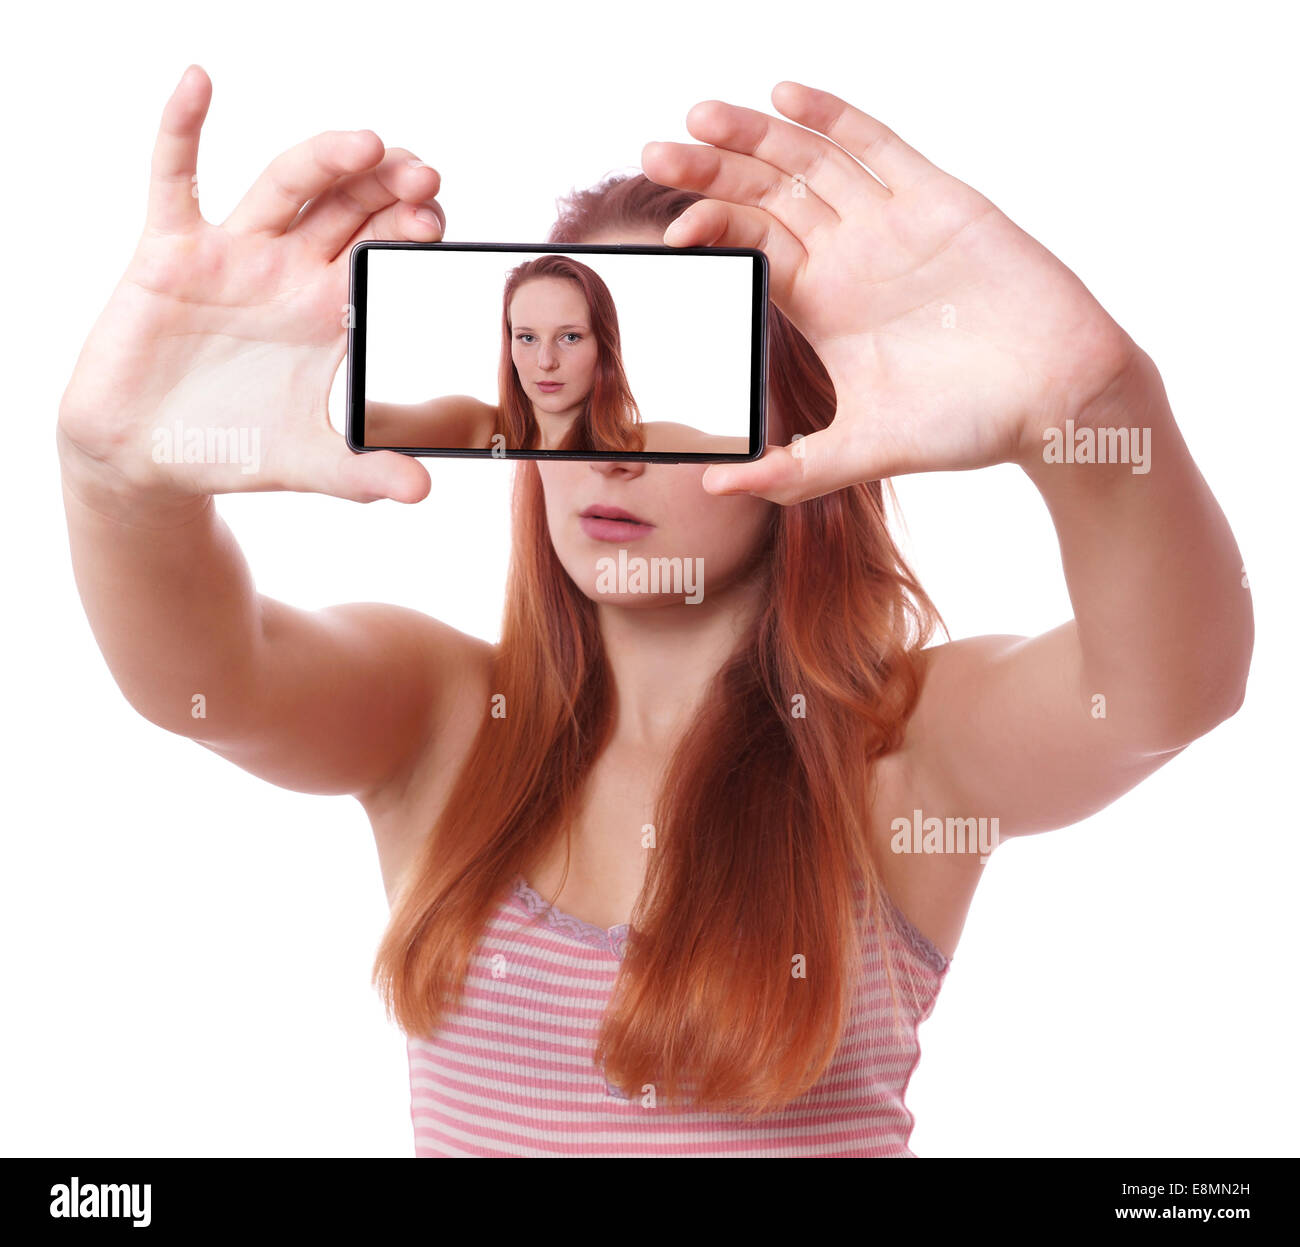 young woman taking selfie with mobile phone Stock Photo